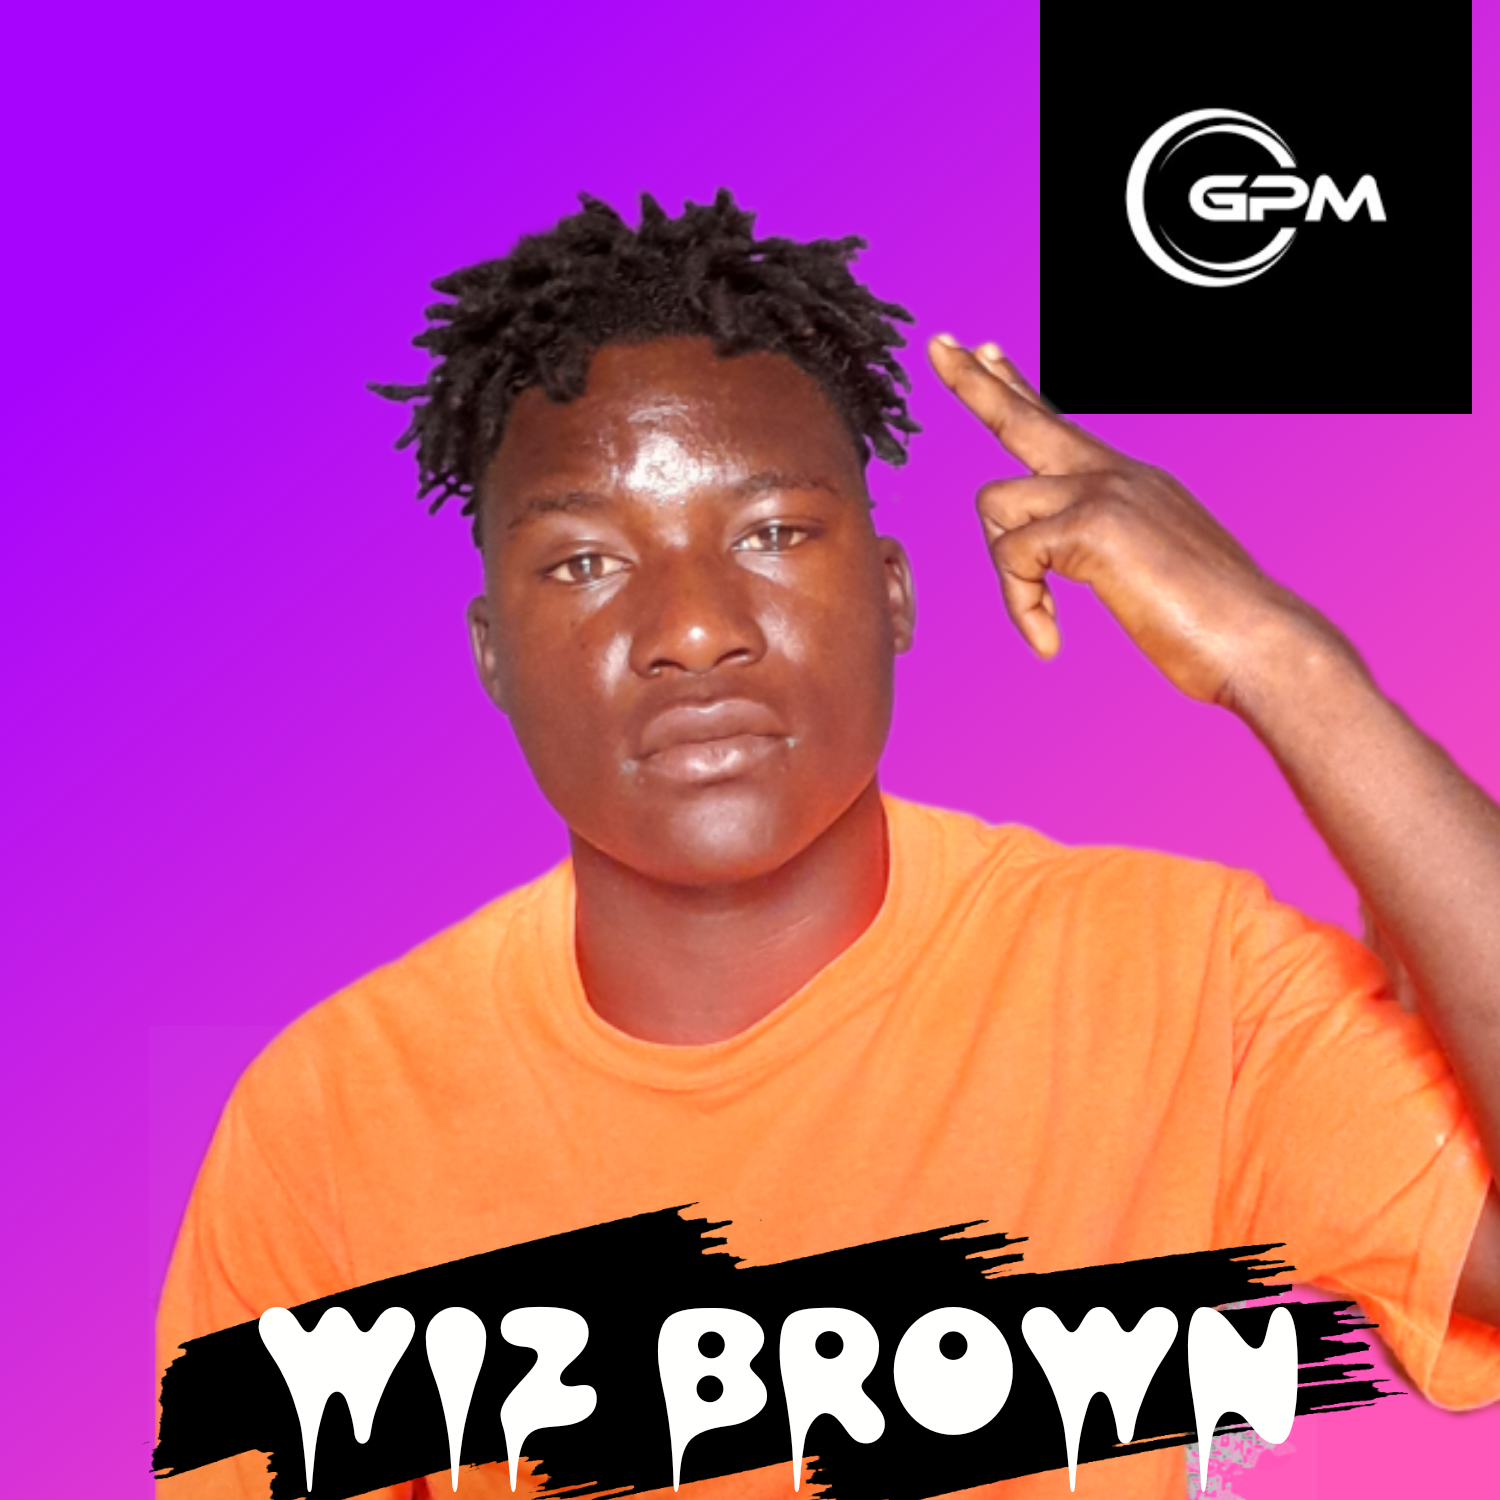 Wizbrown